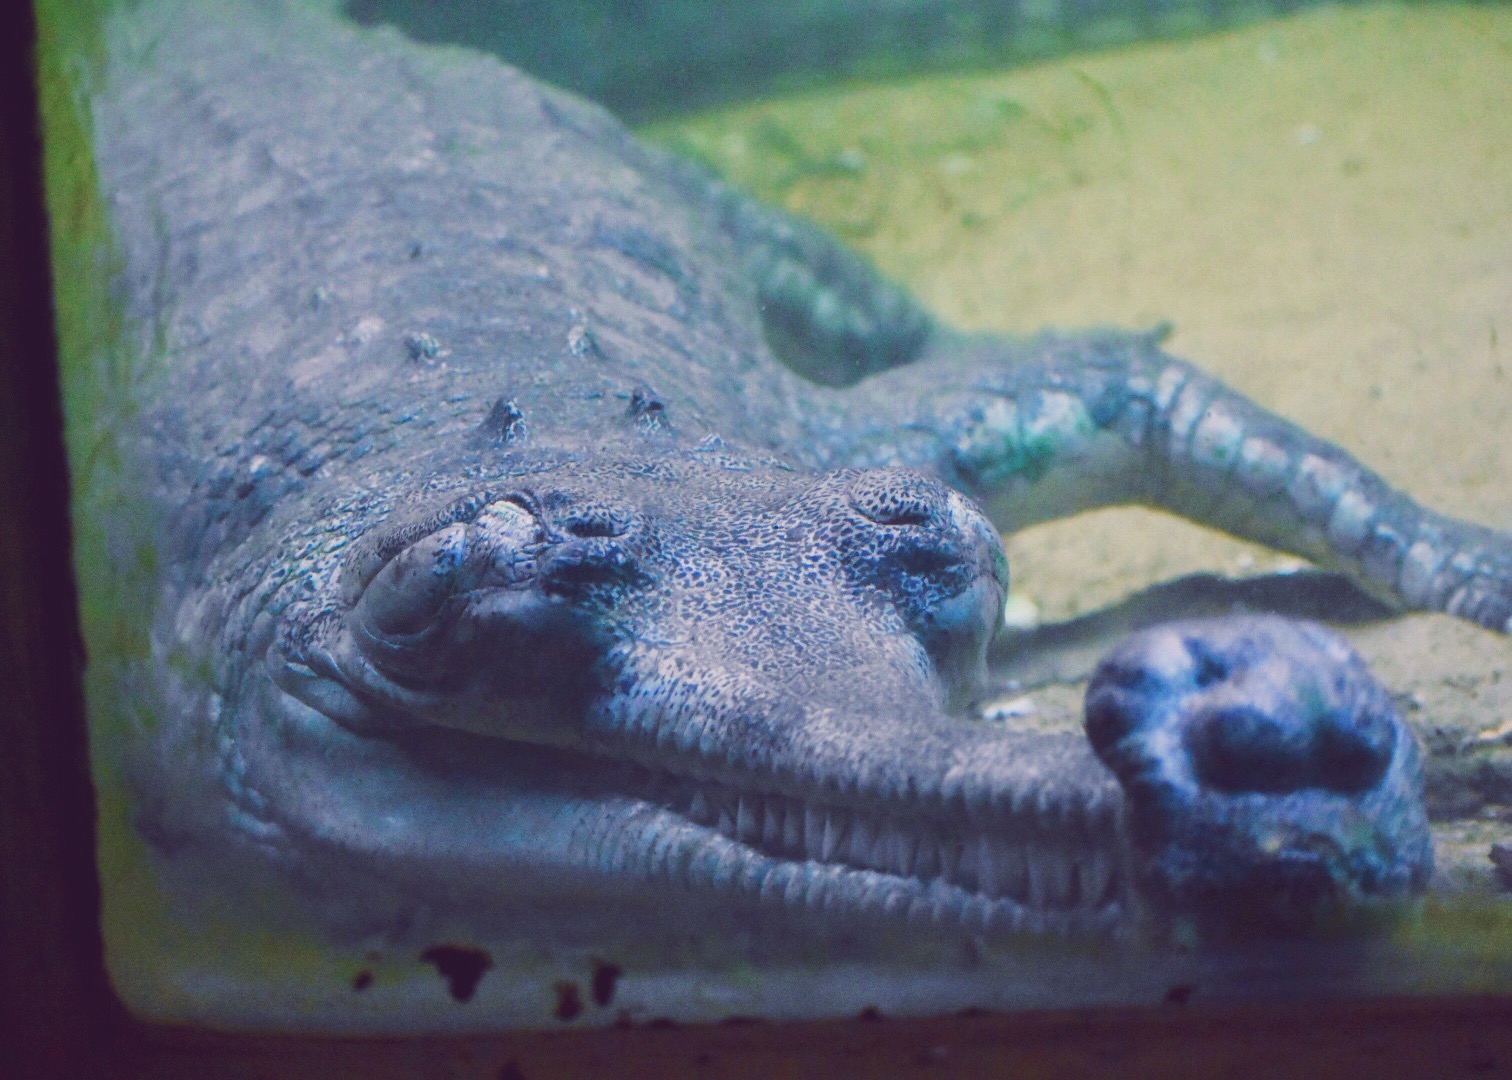 The grinning gharial